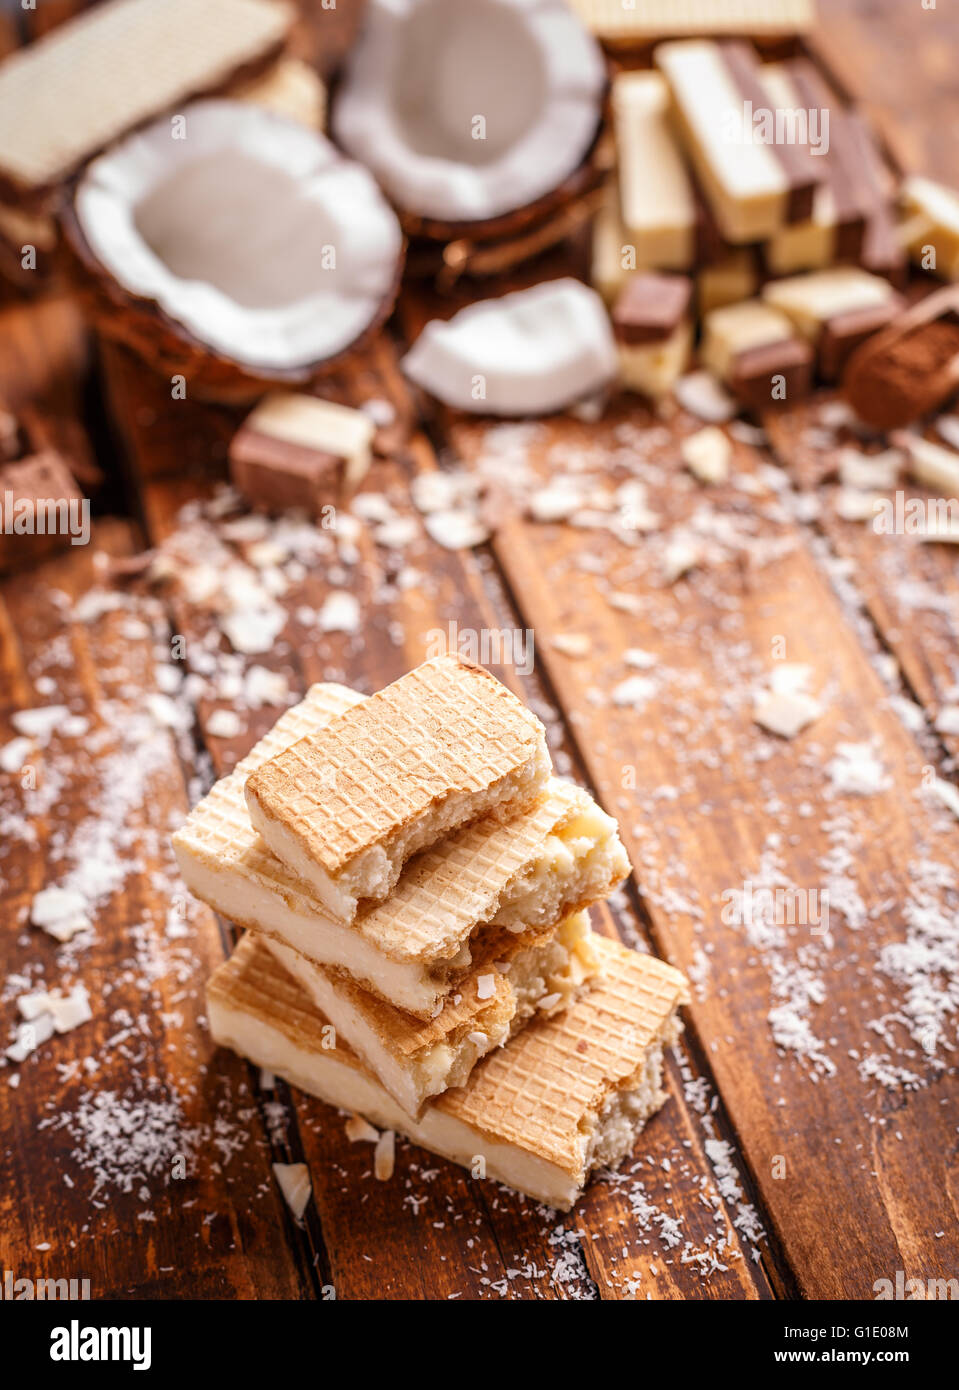 Stack of wafer sandwiches with homemade white chocolate Stock Photo